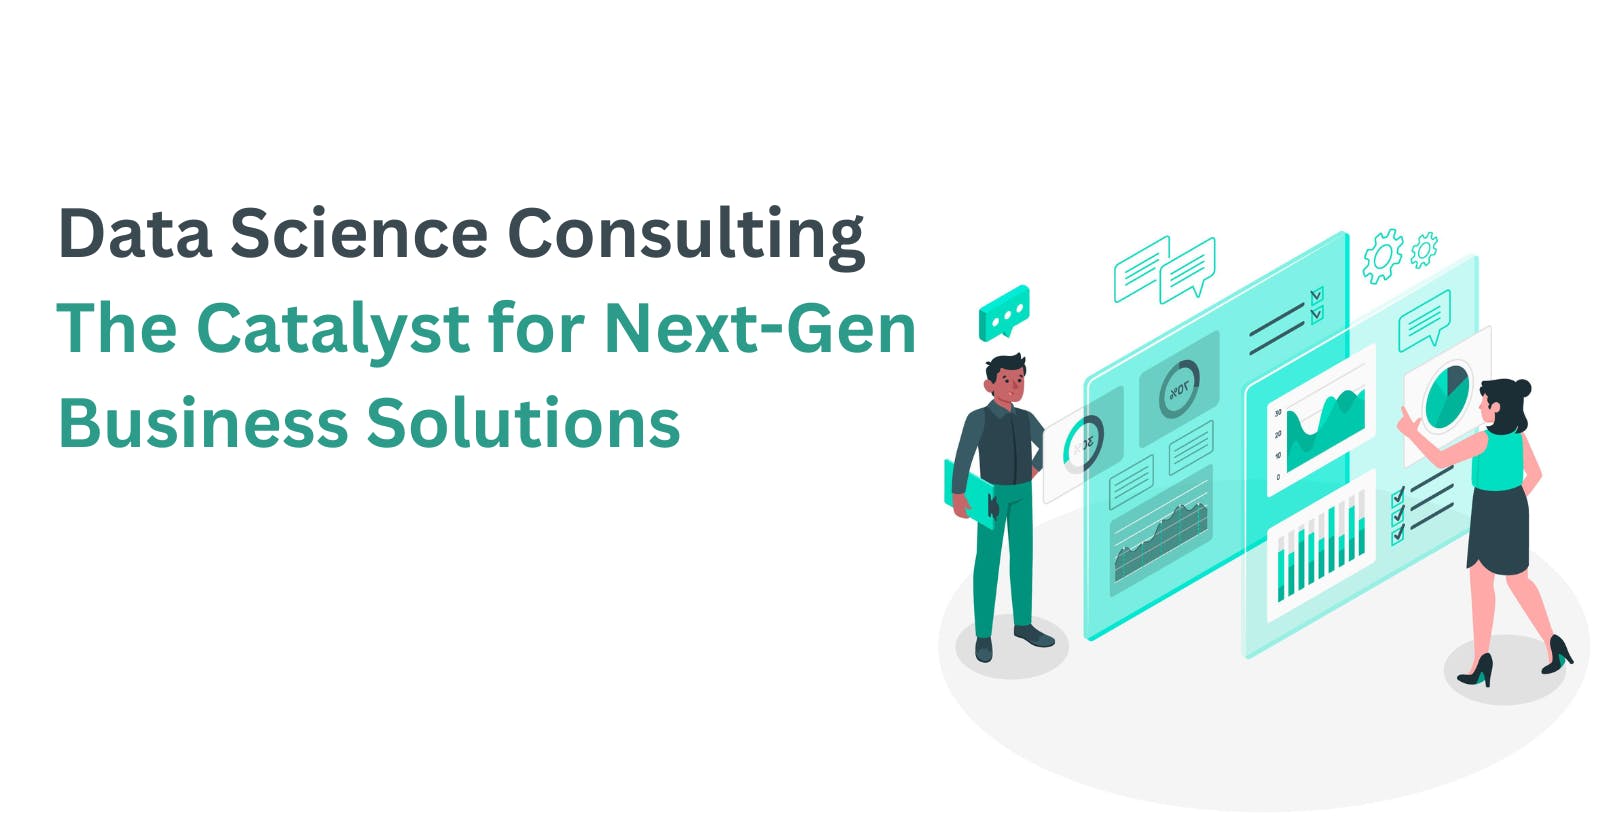 Data Science Consulting: The Catalyst for Next-Gen Business Solutions